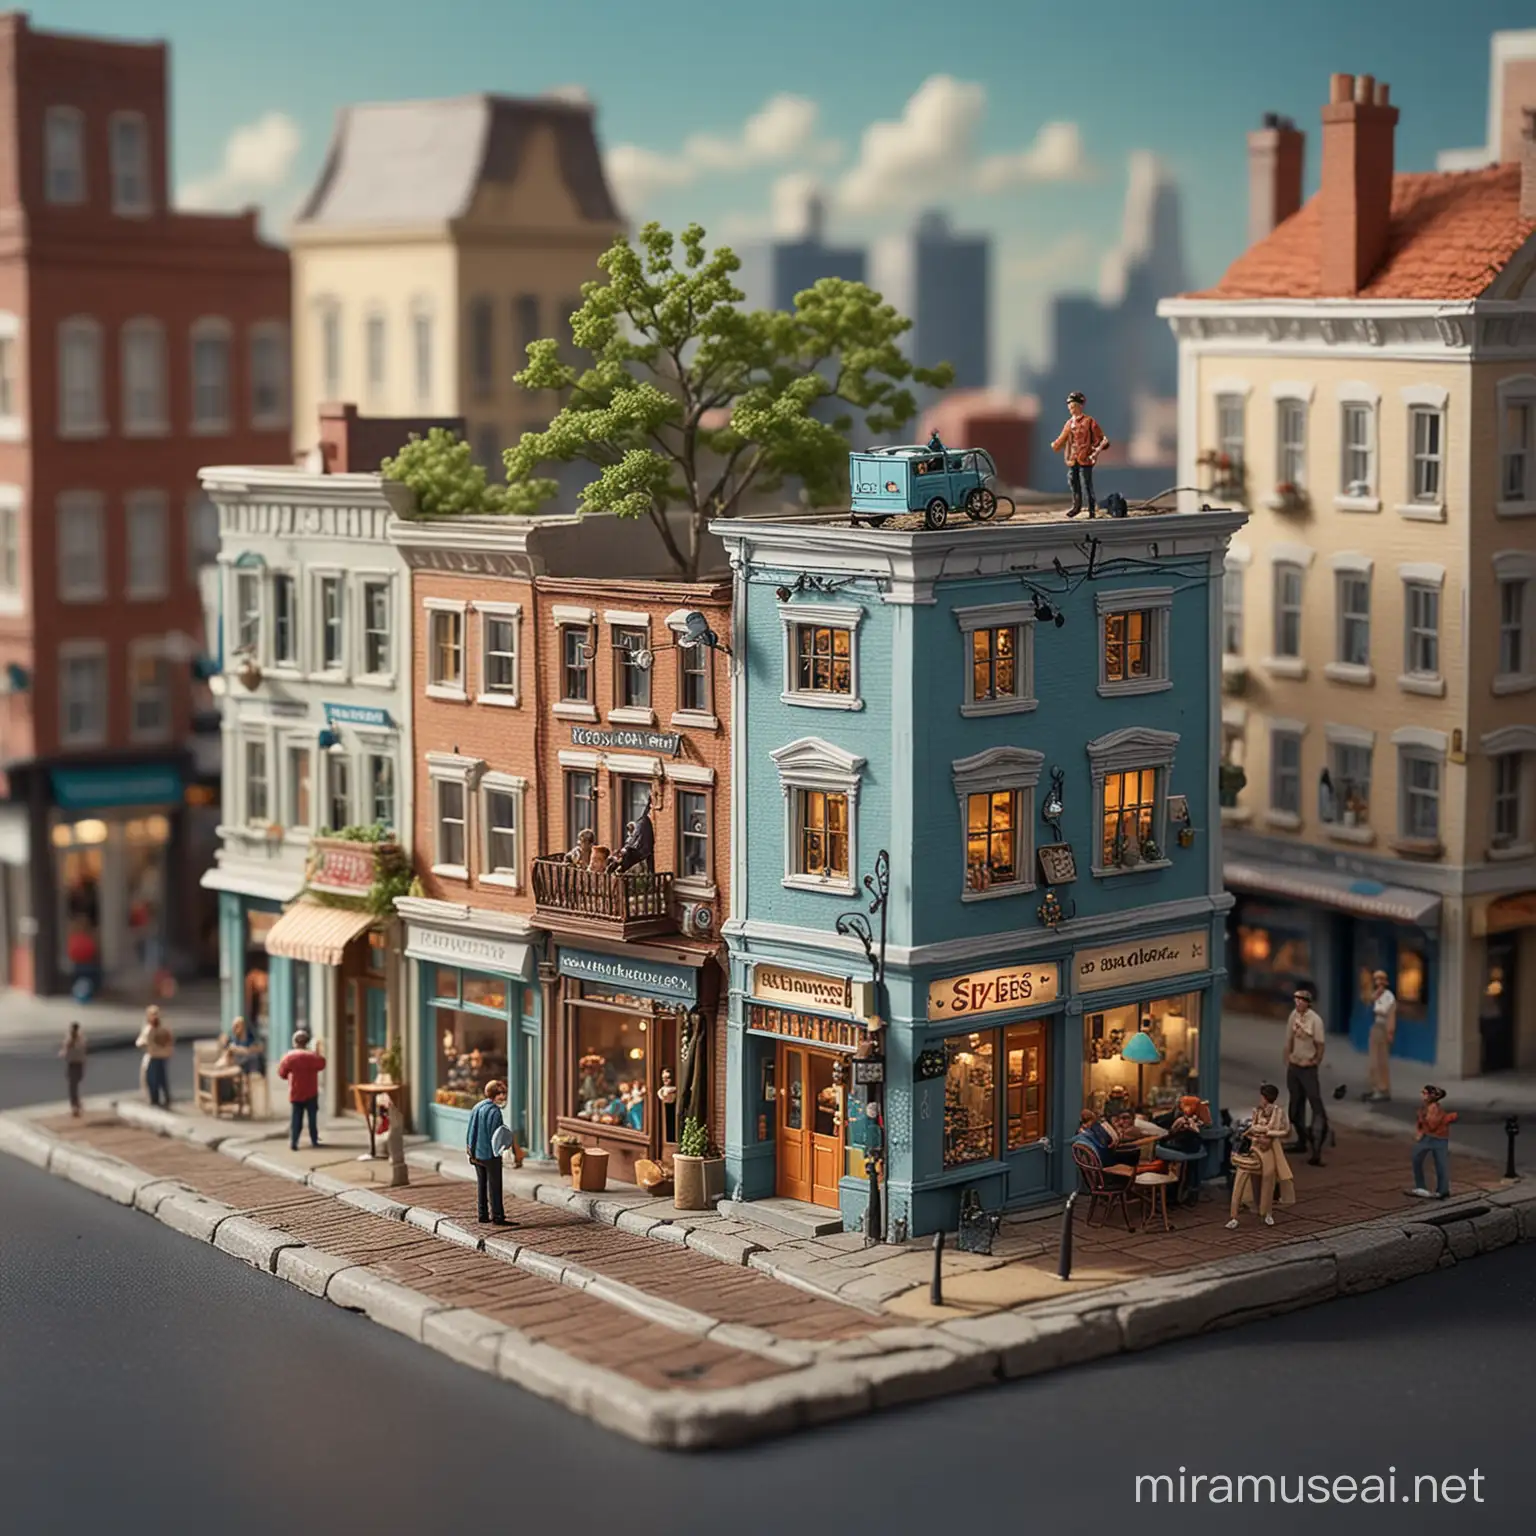 A person is depicted interacting with a miniature city block that offers a glimpse into a bustling urban landscape. The slice of urban life features vibrant storefronts with colorful signage, and tiny shoppers strolling past, adding a sense of liveliness and activity to the miniature world. Atop this miniature city block, the person is playfully engaged, tinkering with a small house-like structure that forms part of the urban model. Their expression conveys a sense of joy and fascination as they interact with this tiny world, blurring the boundaries between the small-scale model and real-life reality. This playful interaction adds a touch of whimsy to the scene, inviting viewers to embrace the magic and wonder of the moment. The person's fond gaze towards their creation suggests a deep connection or sense of ownership with this miniaturized world, evoking feelings of creativity, imagination, and perhaps a hint of nostalgia. The clear blue sky in the background serves to emphasize the light-hearted and carefree nature of the scene, enhancing the overall sense of playfulness and joy. This playful and surreal image beautifully captures the essence of creativity, imagination, and the joy of engaging with a miniature world that blurs the line between reality and fantasy. It invites viewers to embrace a sense of wonder and delight, celebrating the magic of imagination and the joy of playful exploration in a visually captivating and emotionally resonant scene.